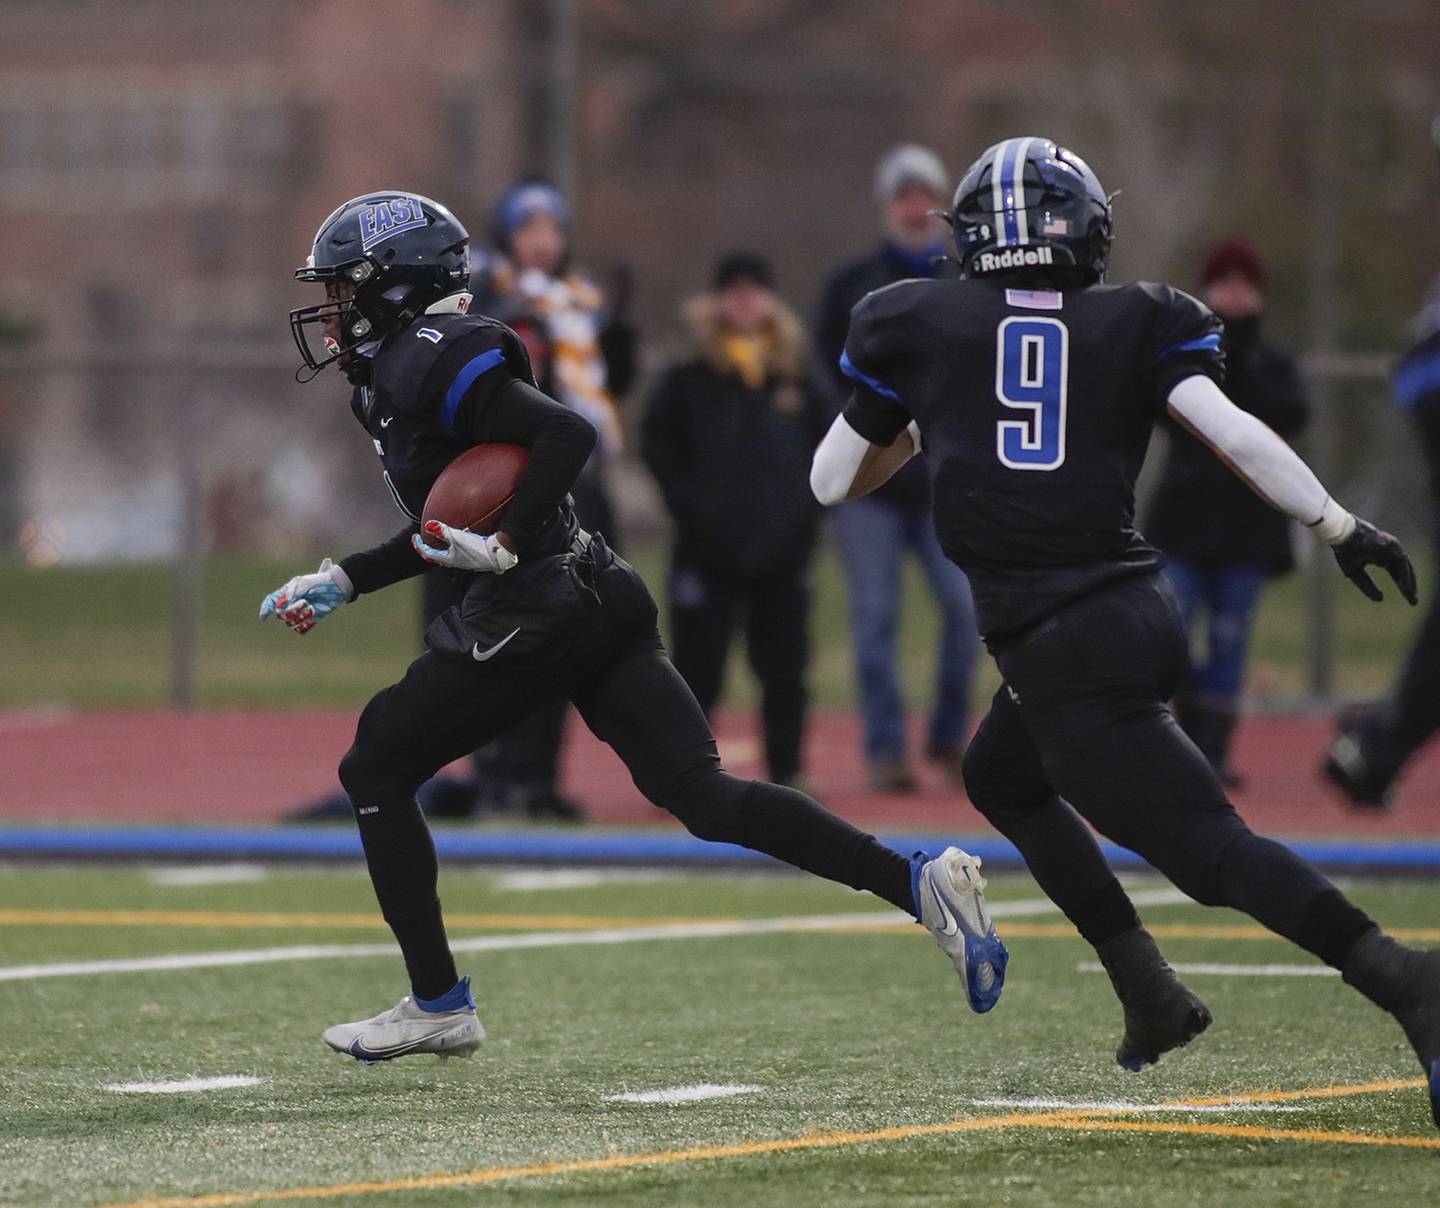 Lincoln-Way East’s Dylan Weathers (1) recovers a fumbled kickoff and runs it back for a touchdown against Warren during a Class 8A state quarterfinal game in Frankfort on Saturday, Nov. 12, 2022.